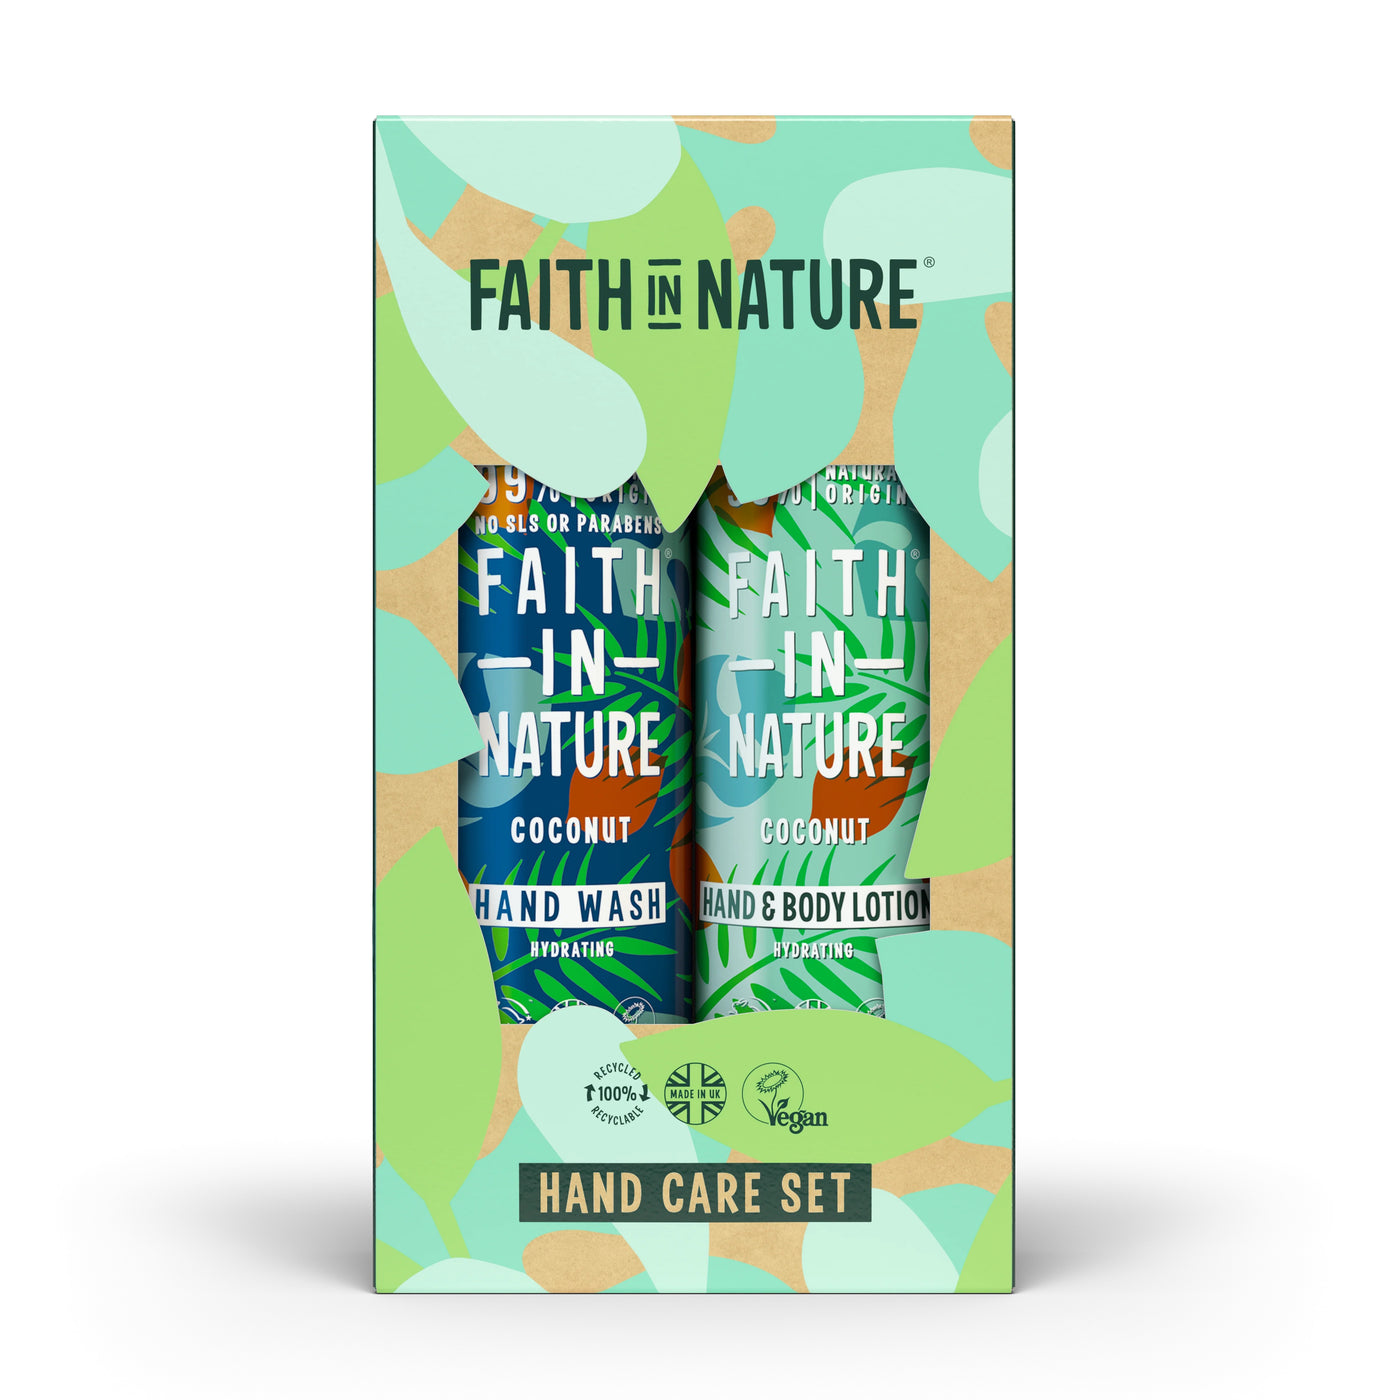 Faith in Nature Coconut - Hand Car Duo Gift Set - Hand Wash/ Handy & Body Lotion